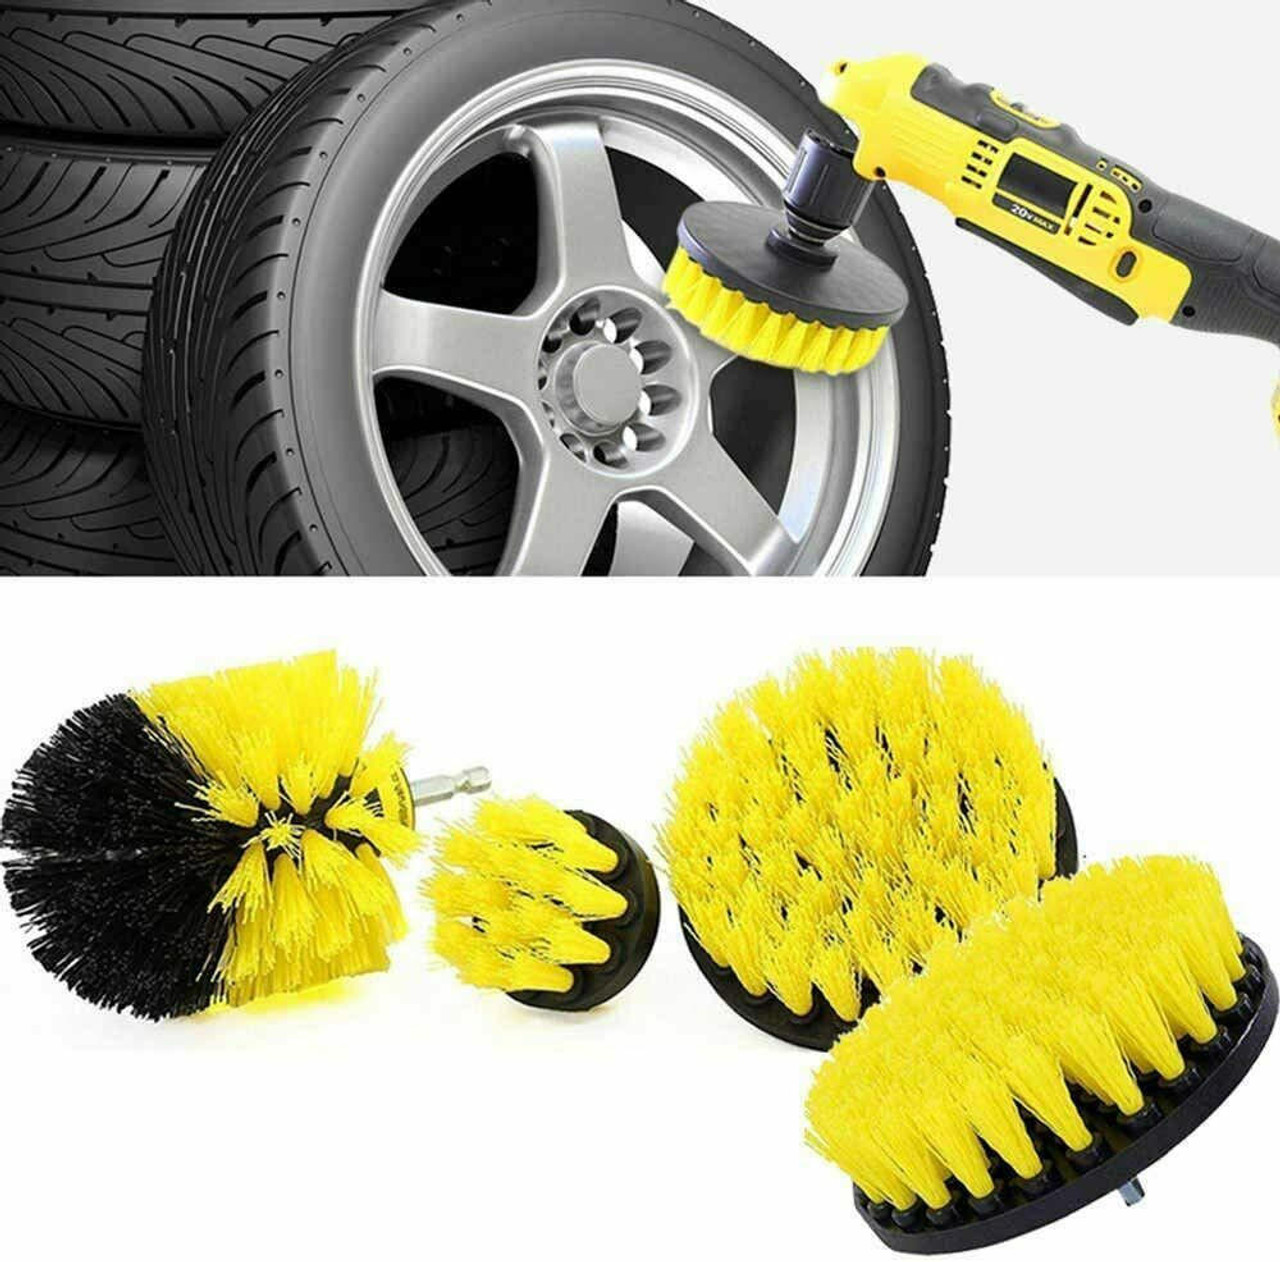 https://cdn11.bigcommerce.com/s-zrh8tkpr8d/images/stencil/1280x1280/products/9946/35554/drill-brush-set-3812-pc-tile-grout-power-scrubber-cleaner-spin-tub-shower-wall__23018.1667769610.jpg?c=2&imbypass=on